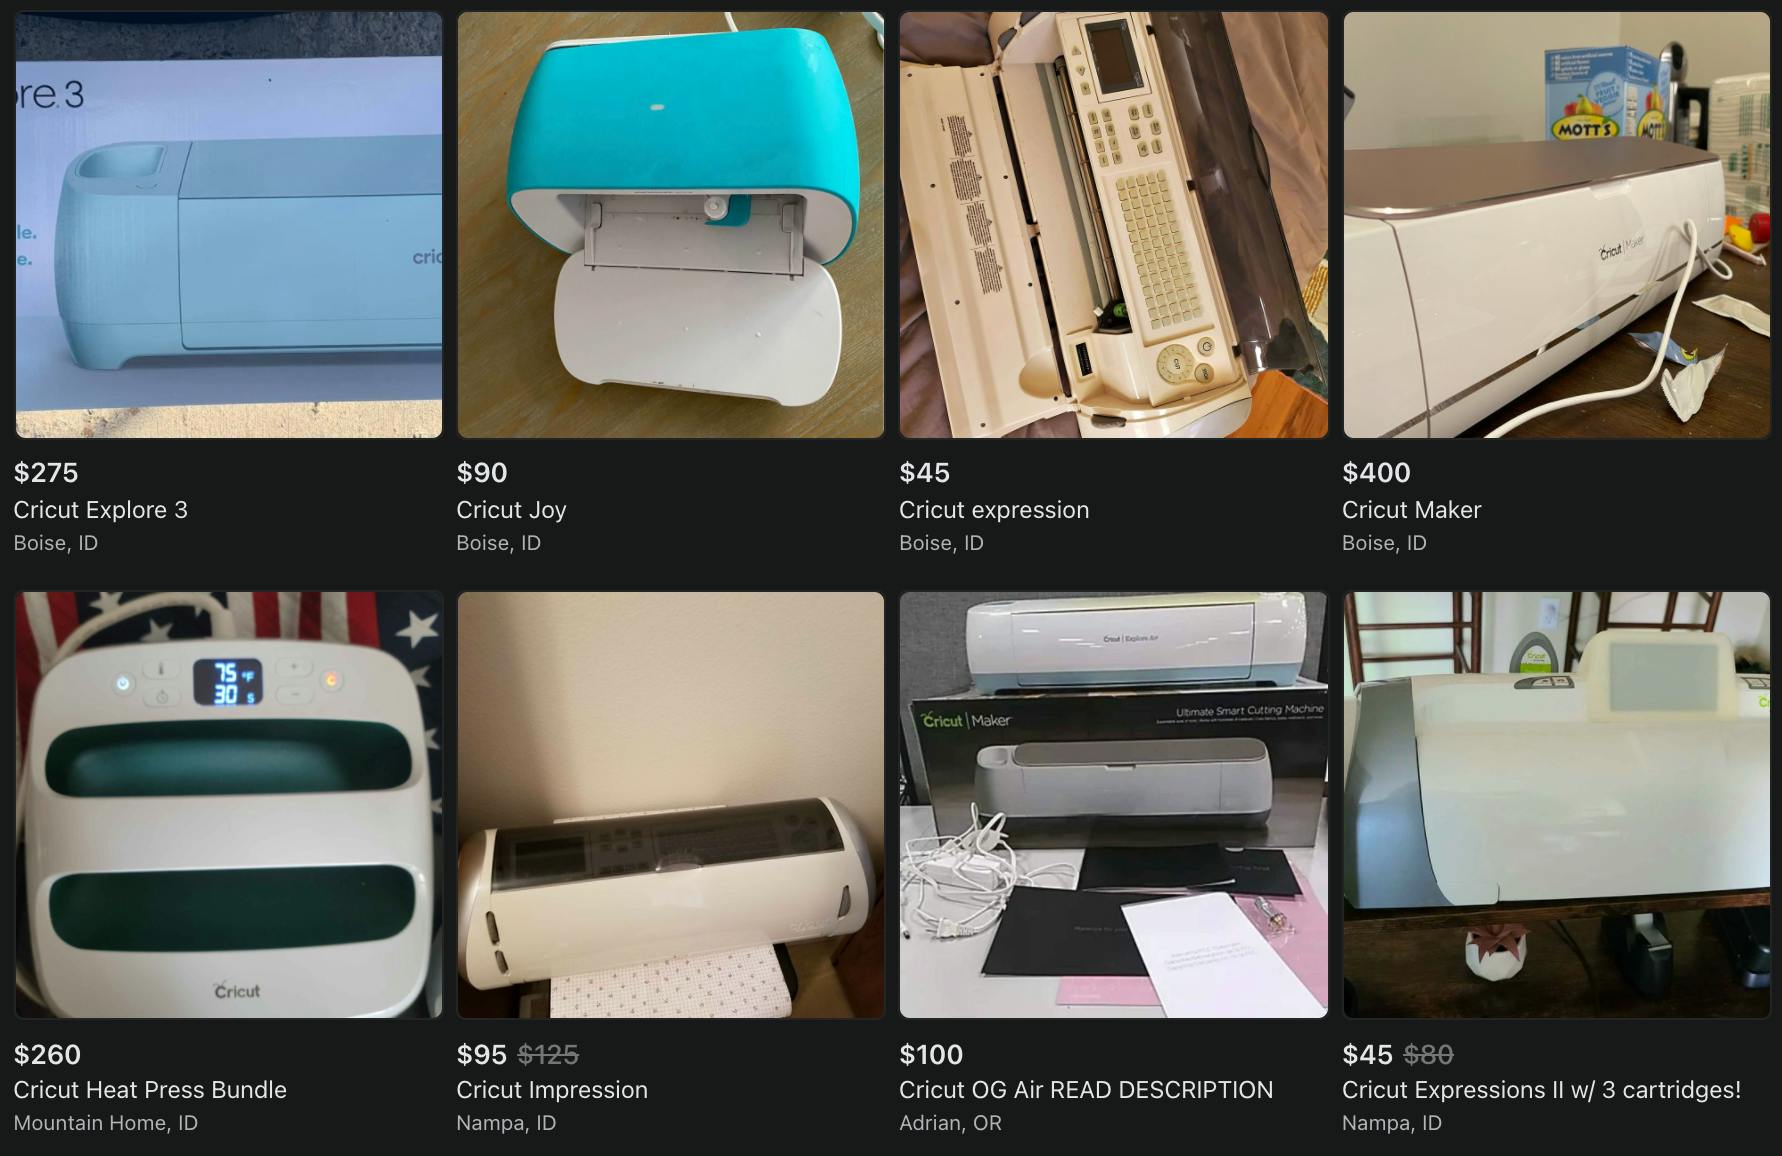 Facebook Marketplace listings of used Cricut machines for sale